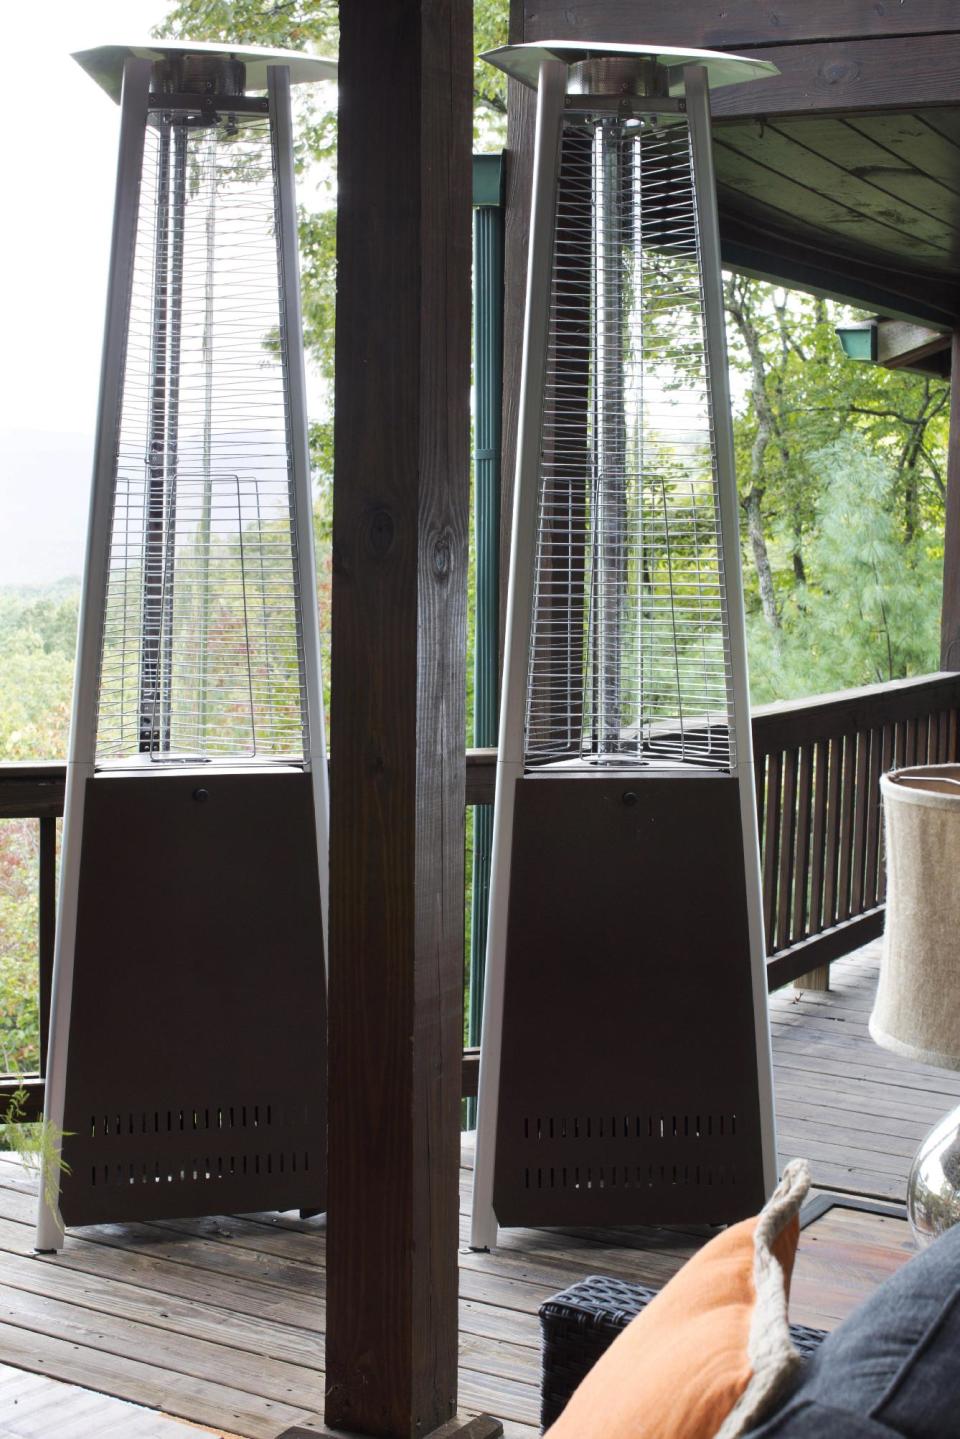 In this undated photo provided by Brian Patrick Flynn and Hayneedle.com, the designer Flynn keeps sculptural outdoor heaters standing by his covered outdoor living and dining spaces. Should the weather become cold, these easily wheel back and, bringing the proper amount of heat wherever it's needed. Once lit with enclosed propane tanks, not only do the heaters keep guests warm, but the heaters themselves also take on an artistic presence, adding to Flynn's decor of the space. (AP Photo/Brian Patrick Flynn, Hayneedle.com)